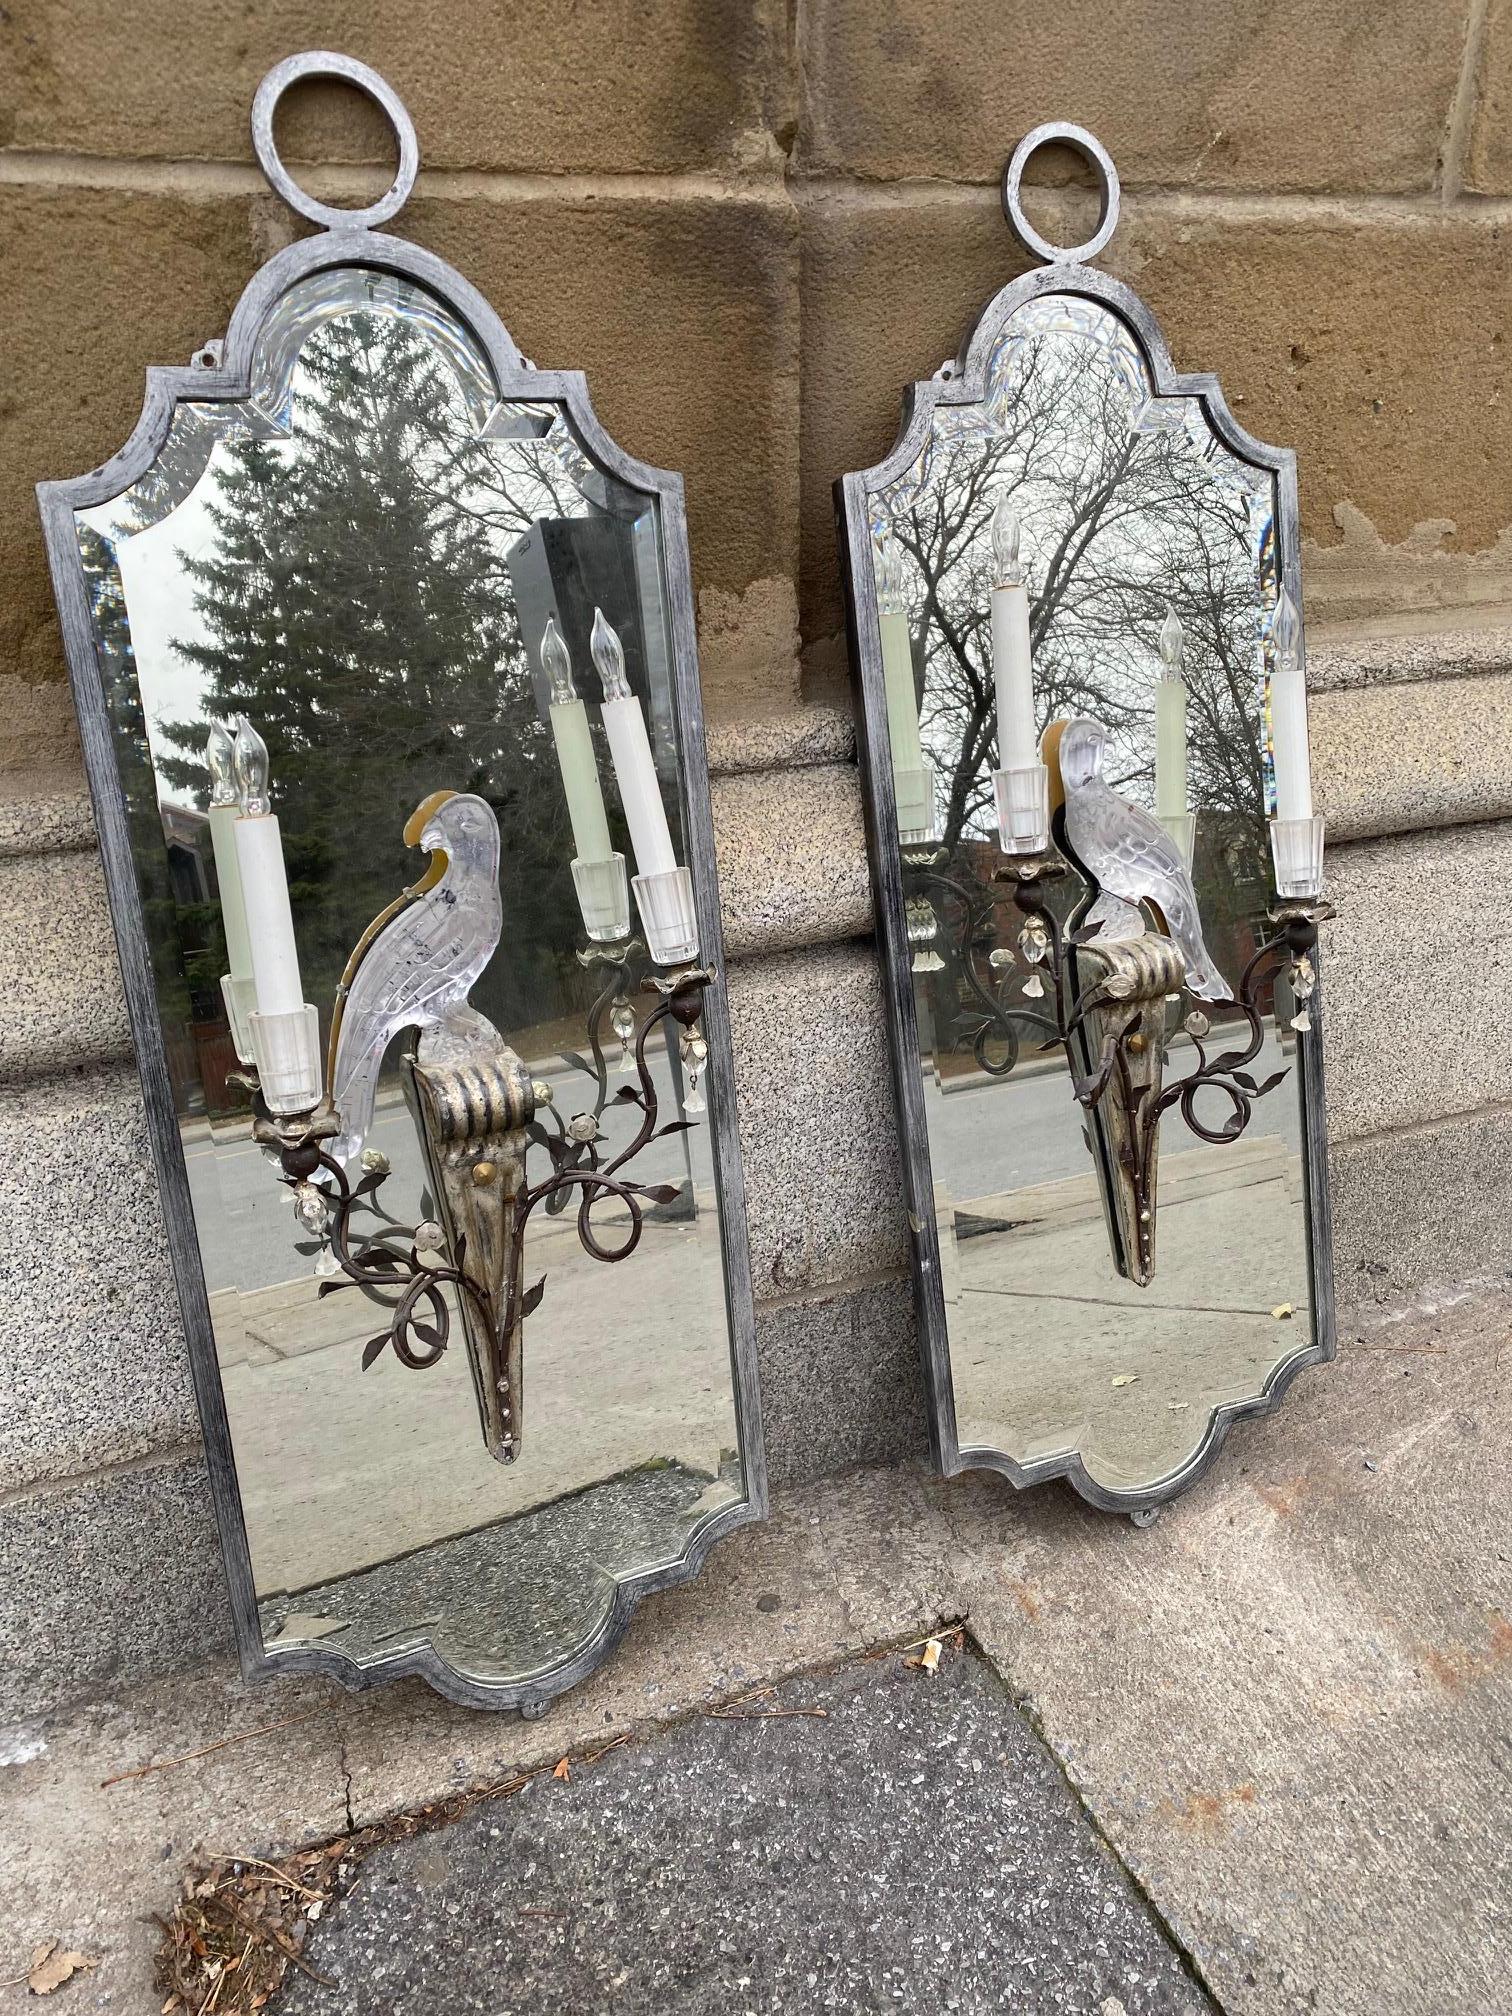 Rare Pair of Maison Baguès   parrot girandoles  mirrors fitted with typical moulded and etched glass parrot sconce figures.Shaped beveled mirrored glass set in silvered iron frames.
